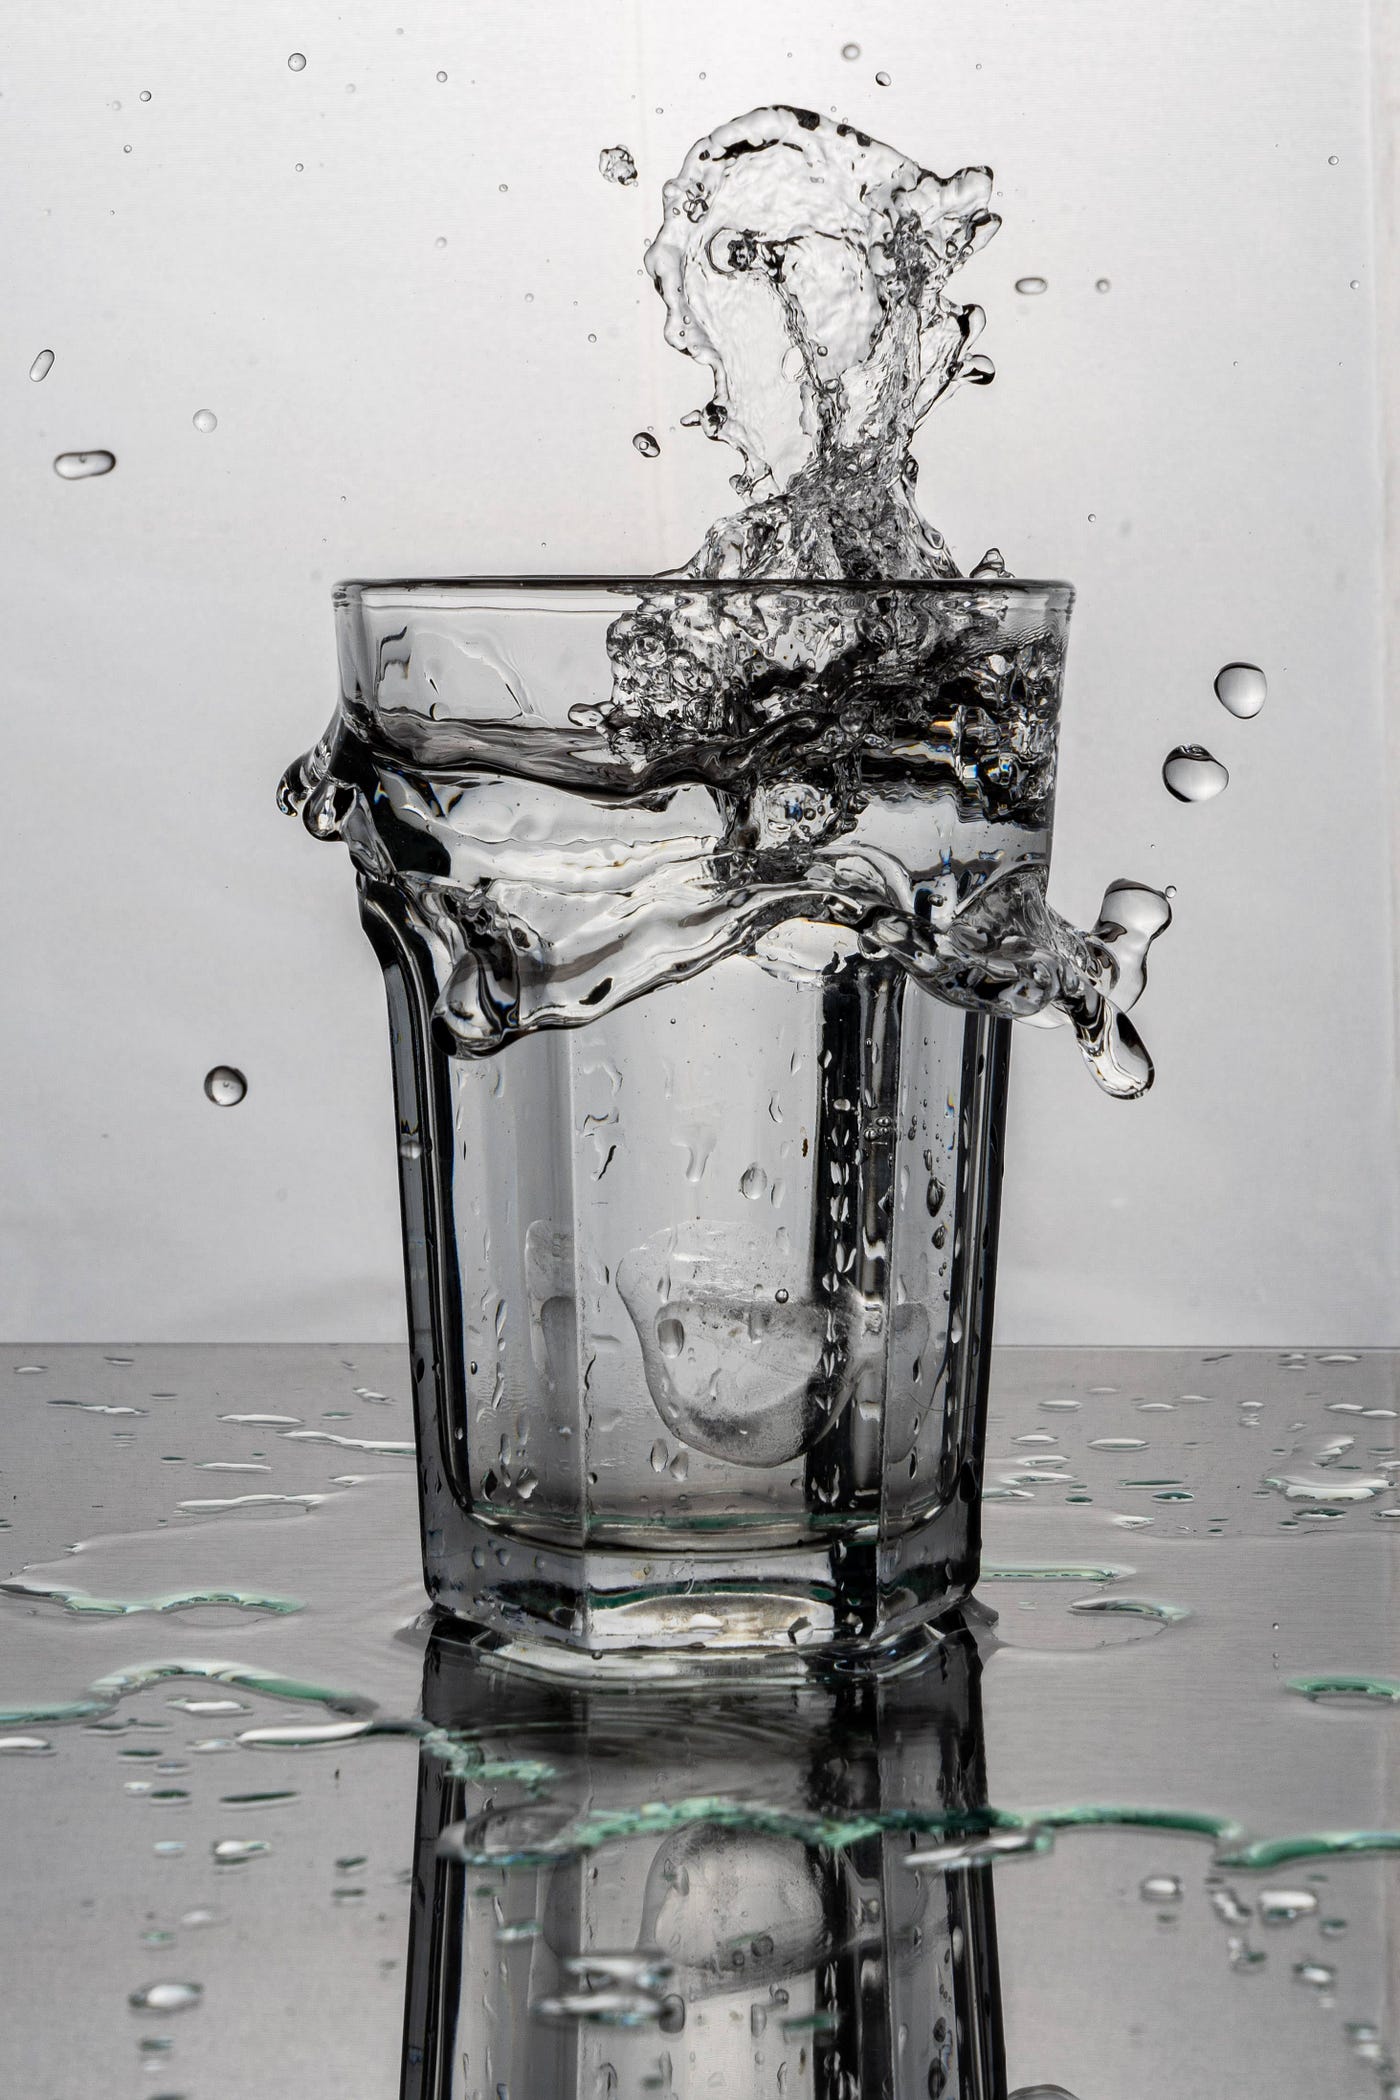 A black and white image of a glass of water splashing upward. To counteract the dehydrating effects of alcohol, alternating between sips of water and wine can help maintain hydration levels and reduce the risk of headaches. Try drinking a full glass of water before drinking wine.